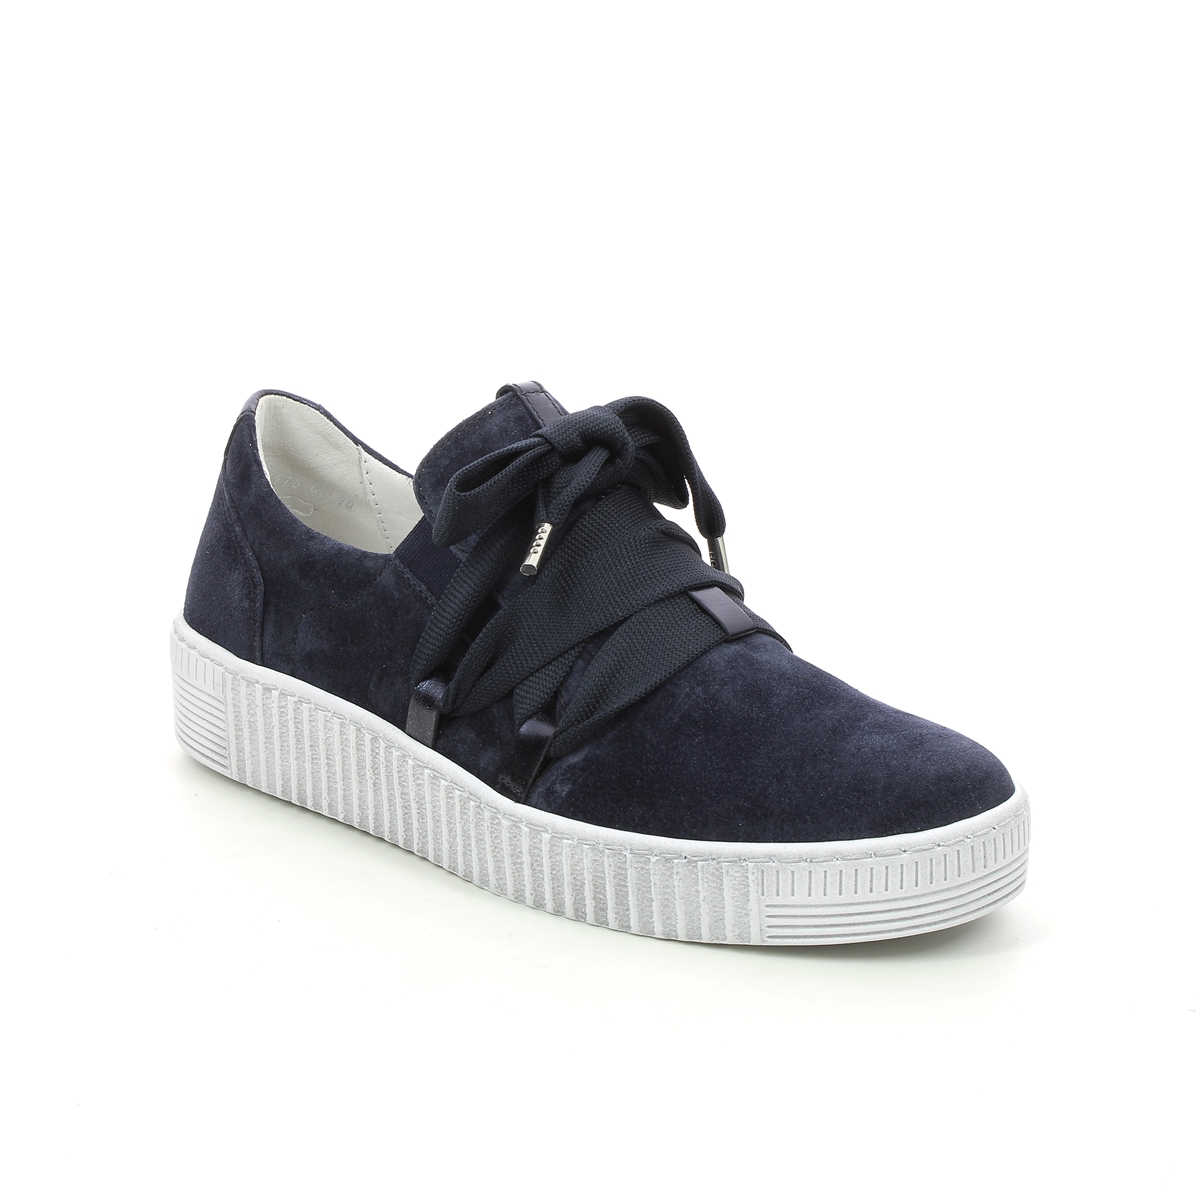 Gabor Waltz Navy suede Womens trainers 73.333.16 in a Plain Leather in Size 6.5